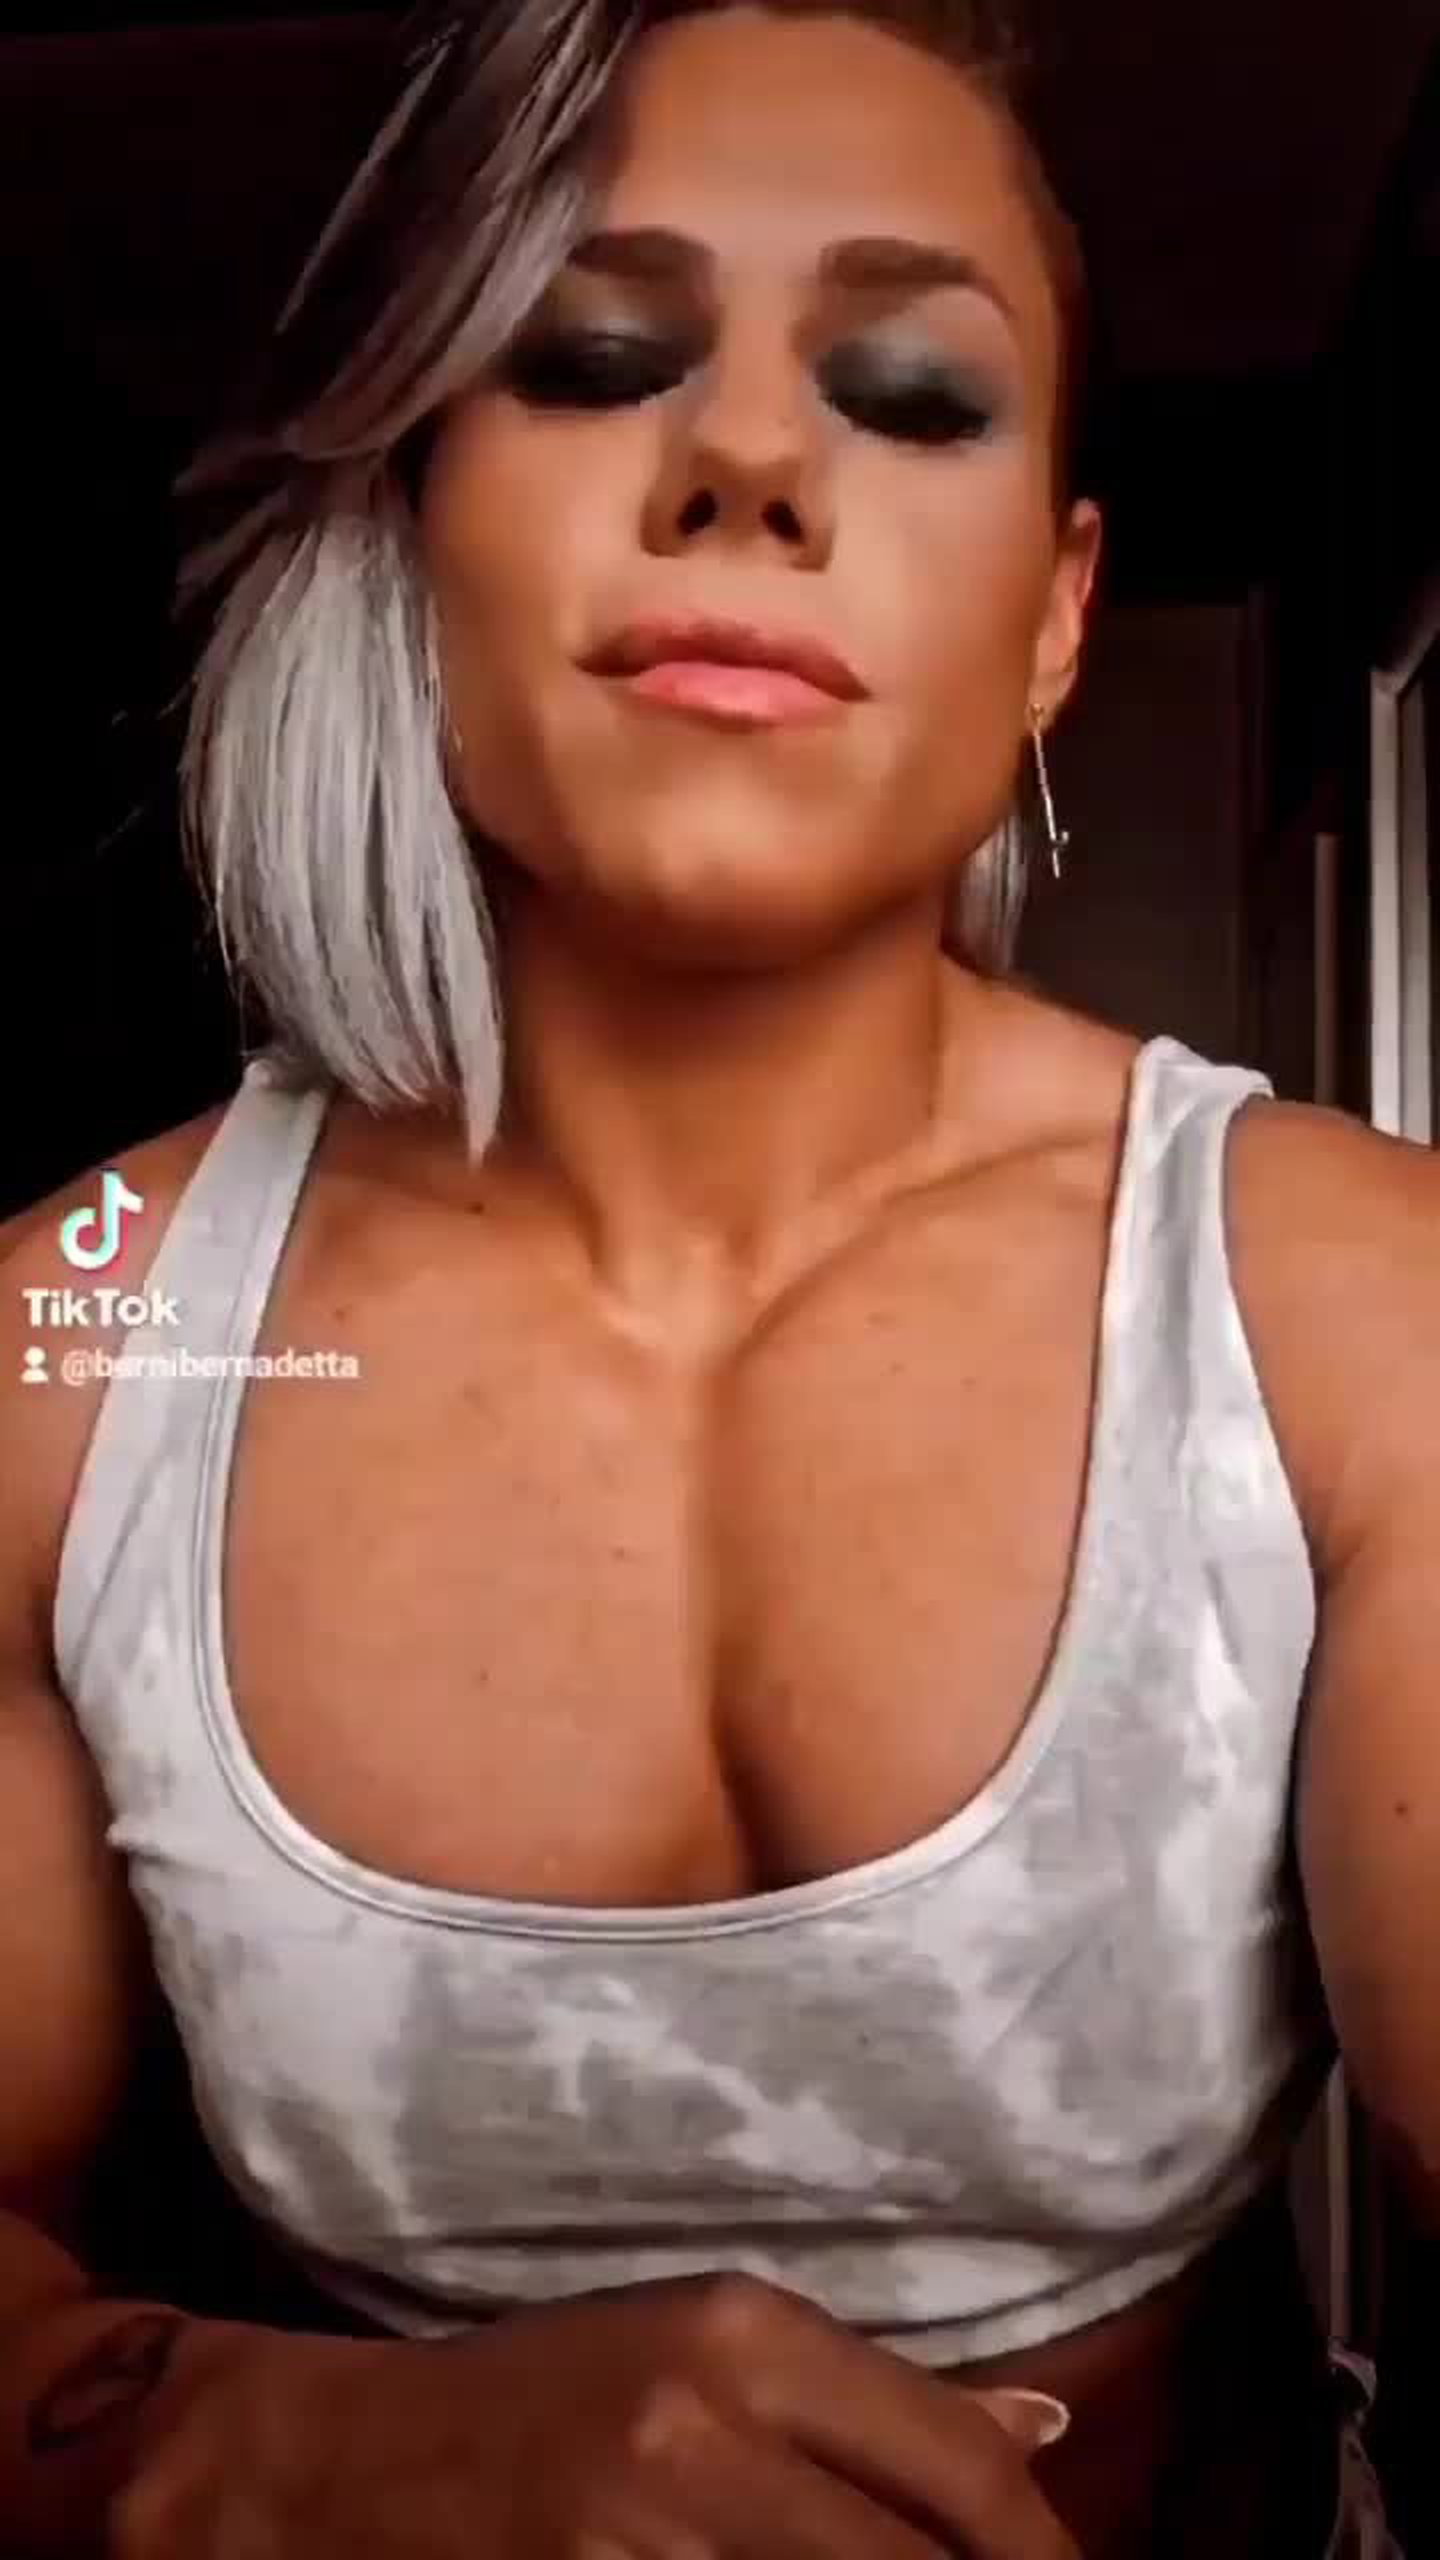 Video post by SweetWetChocolate